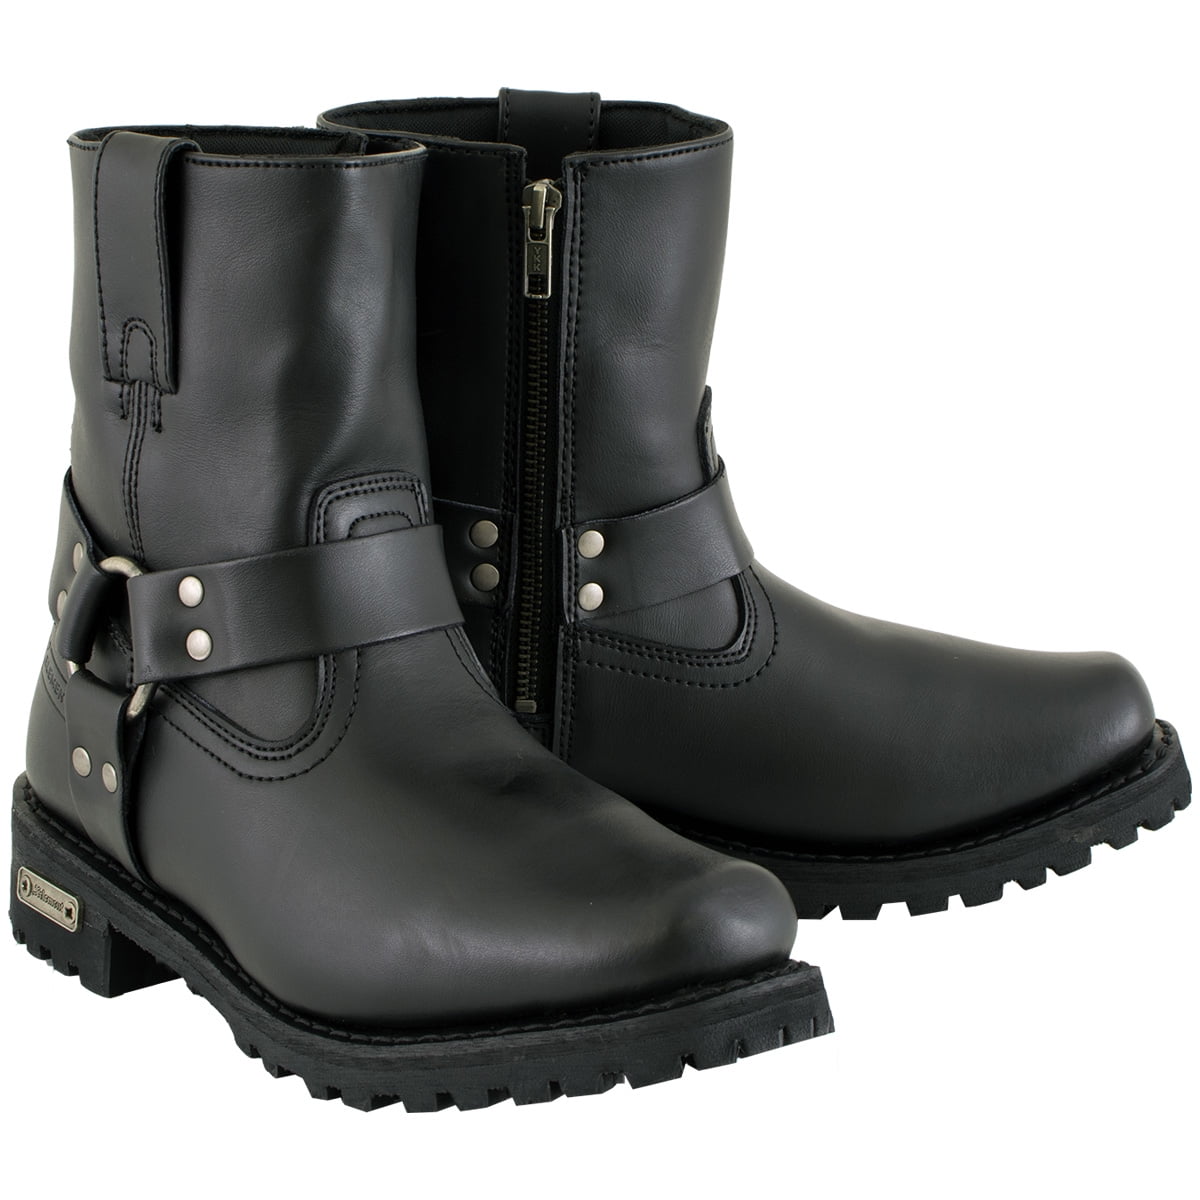 women's harness motorcycle boots